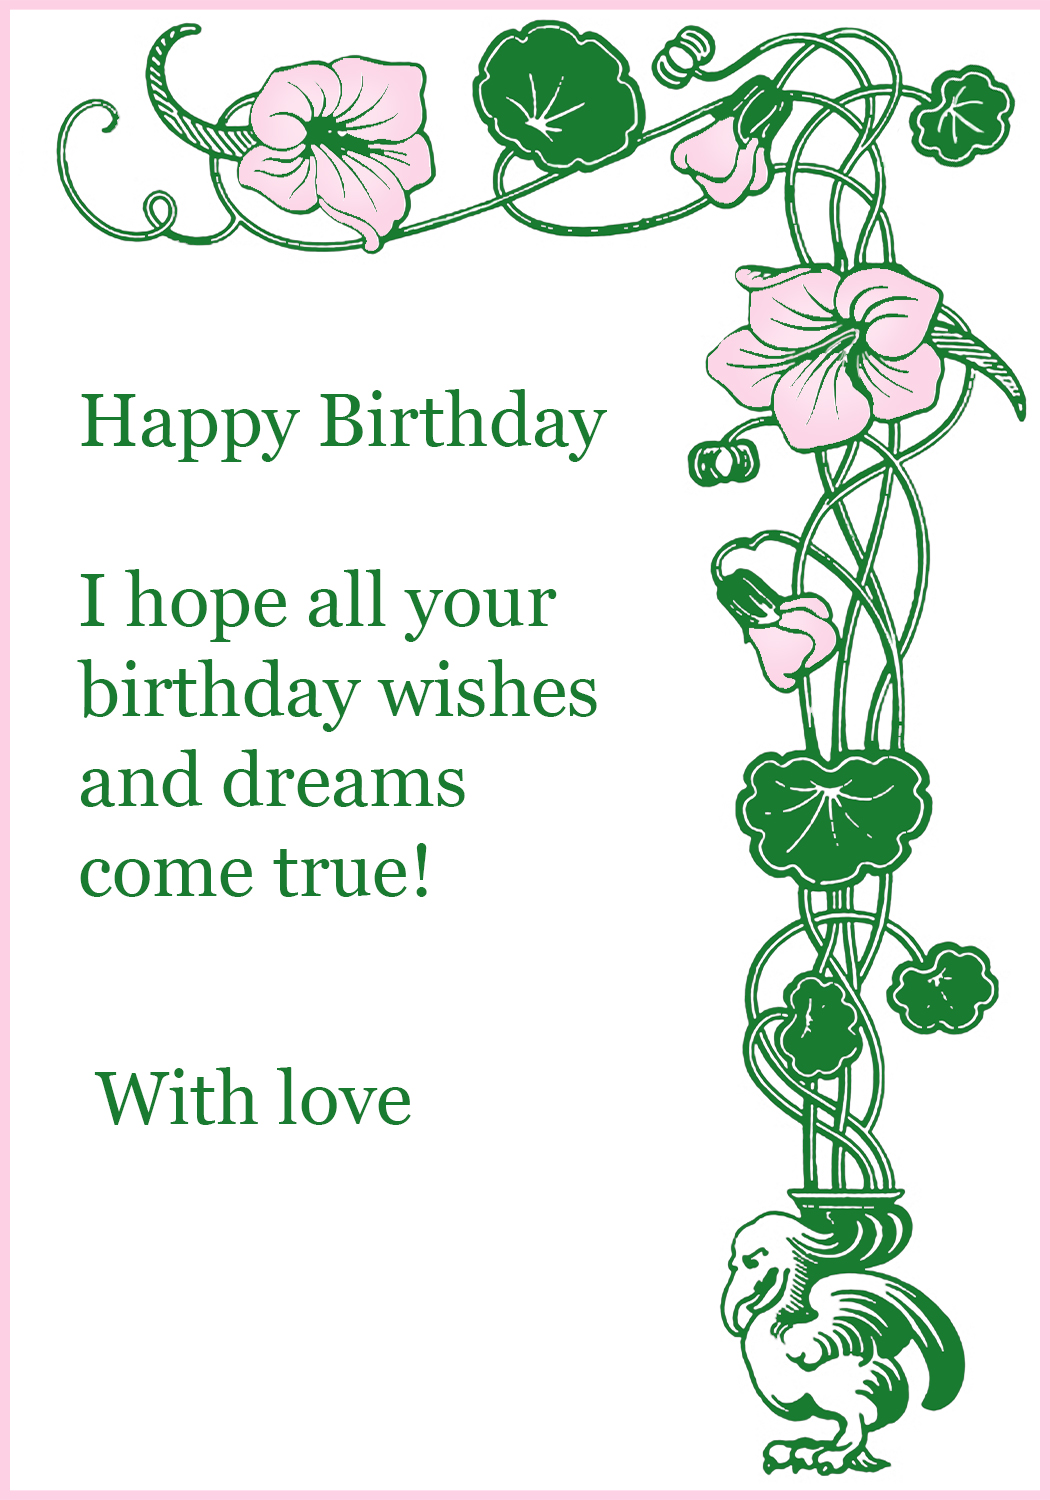 happy-birthday-card-for-you-free-printable-greeting-cards